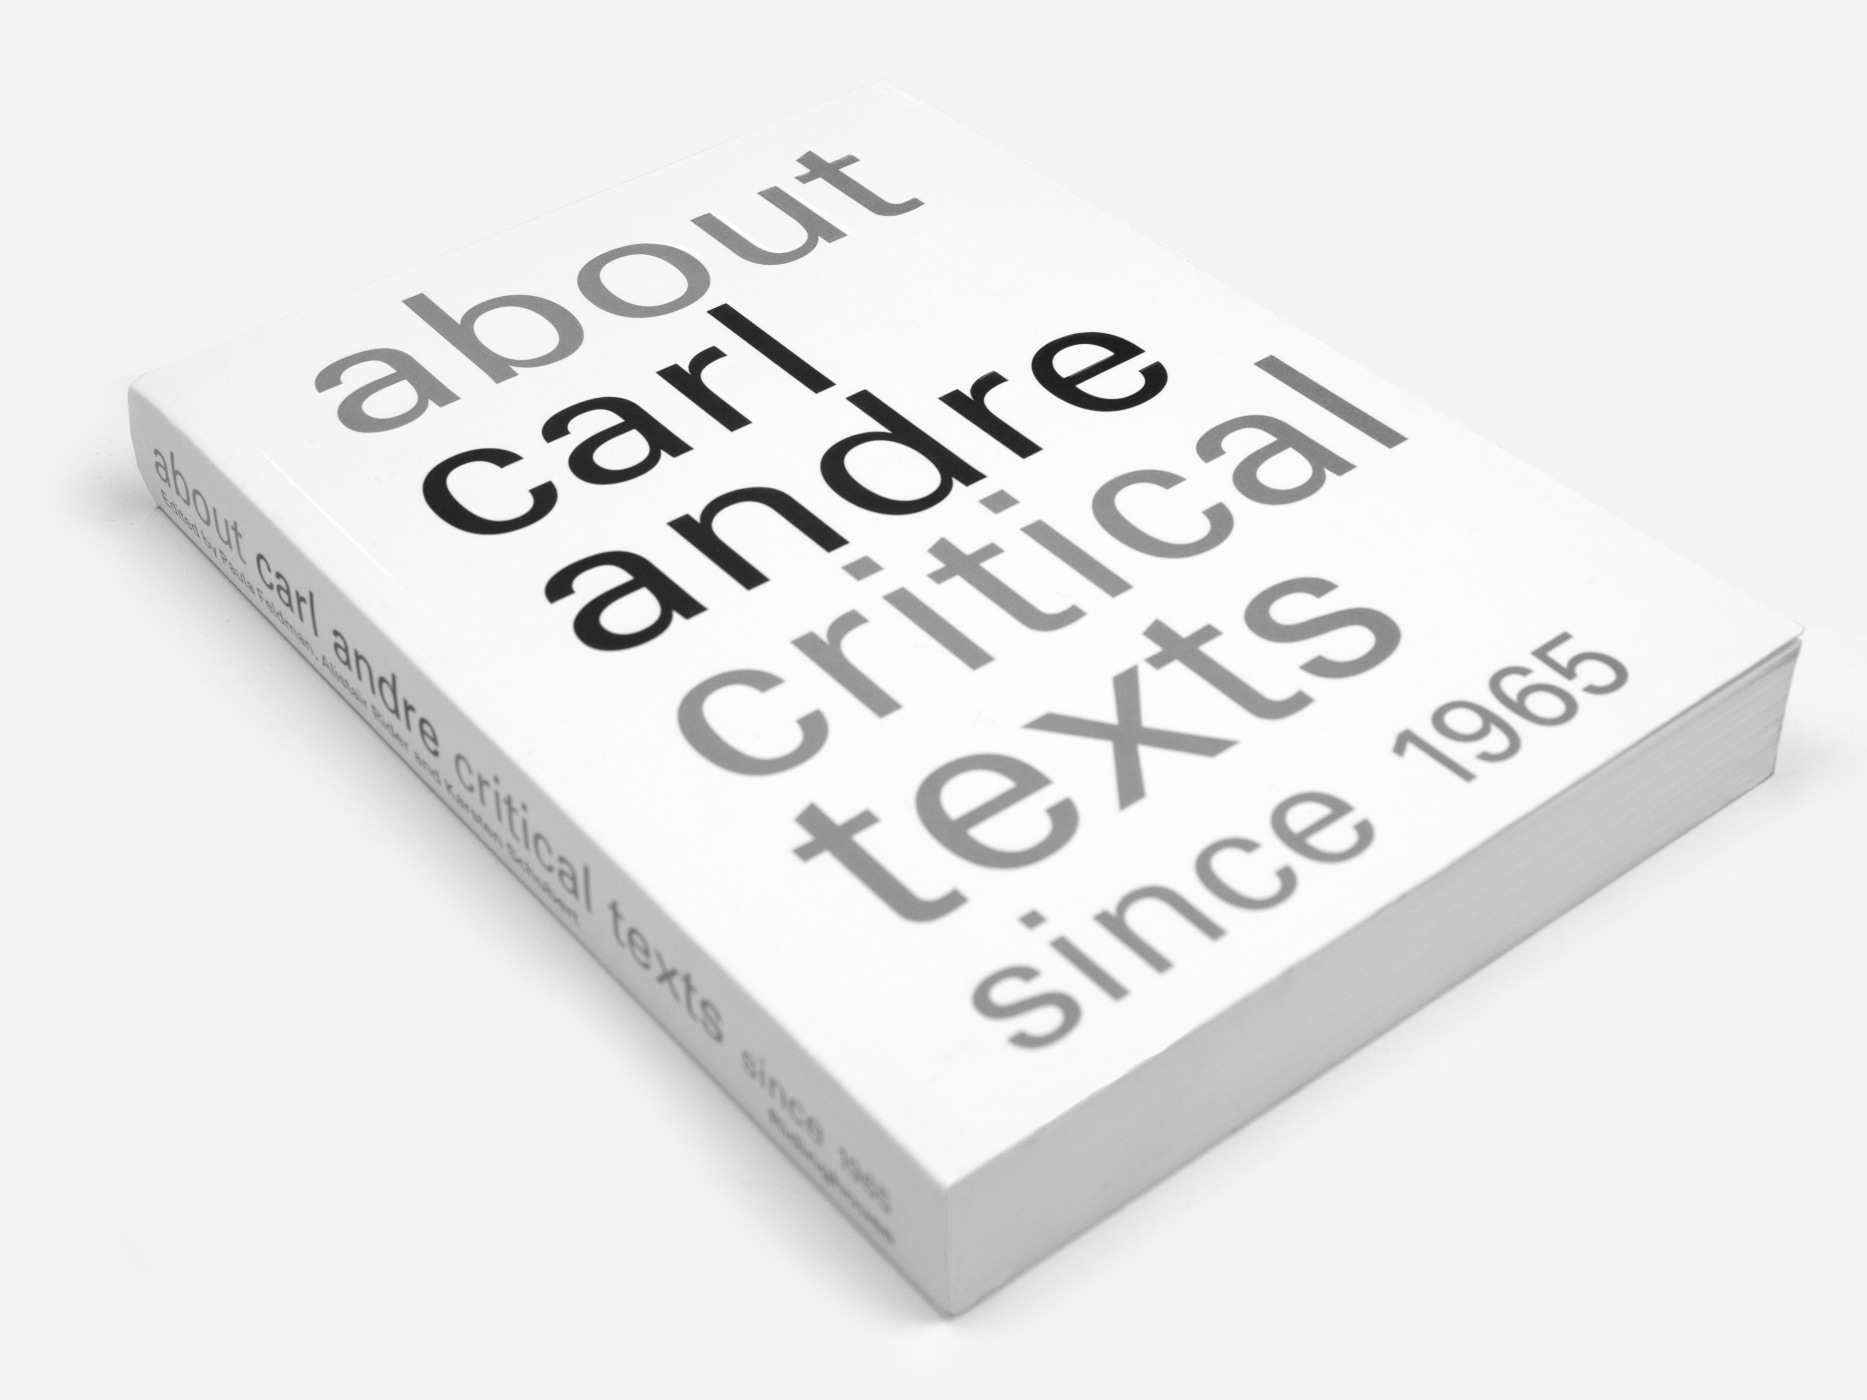 Publication Carl Andre About Carl Andre Critical Texts Since 1965 Sadie Coles Hq